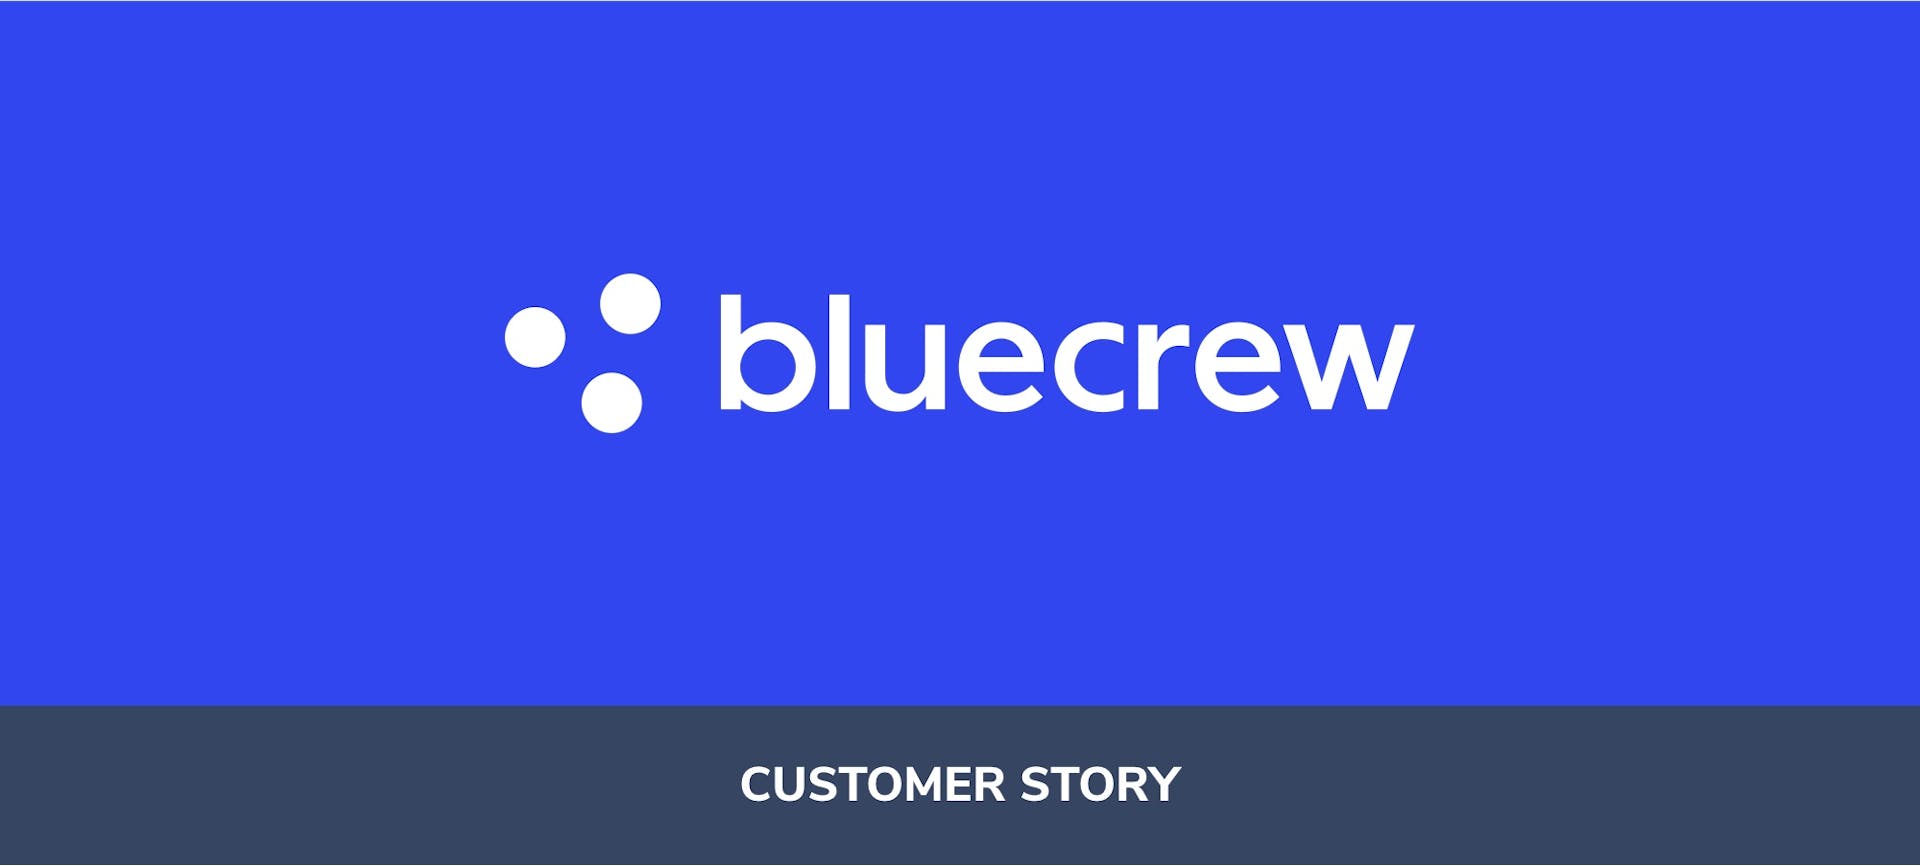 Bluecrew Customer Story with Courier